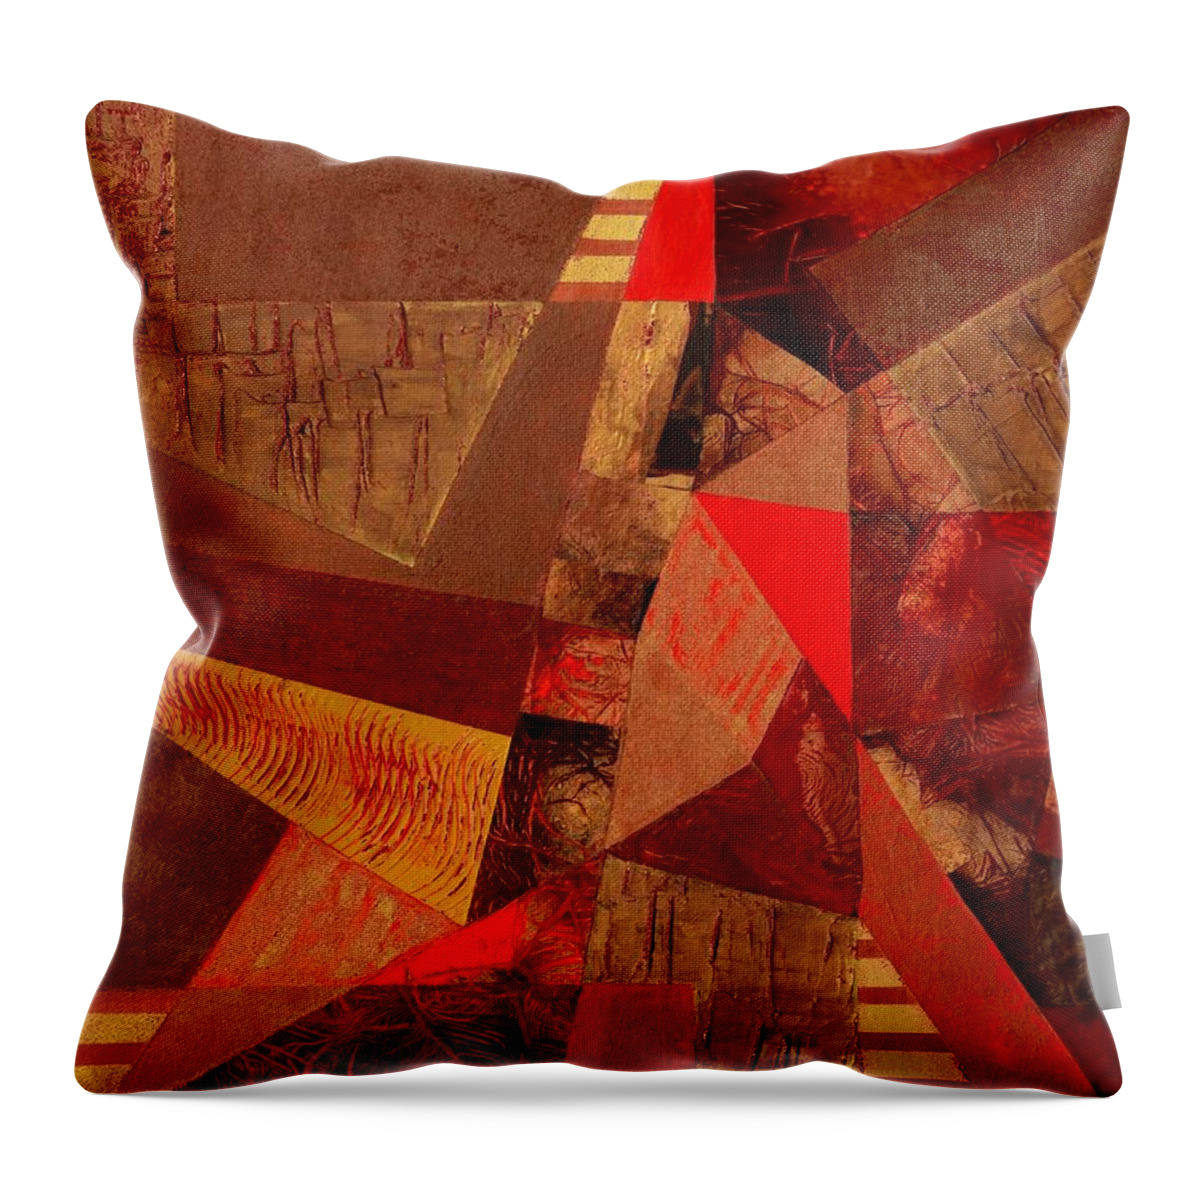 Red Throw Pillow featuring the painting Teamwork by Linda Bailey